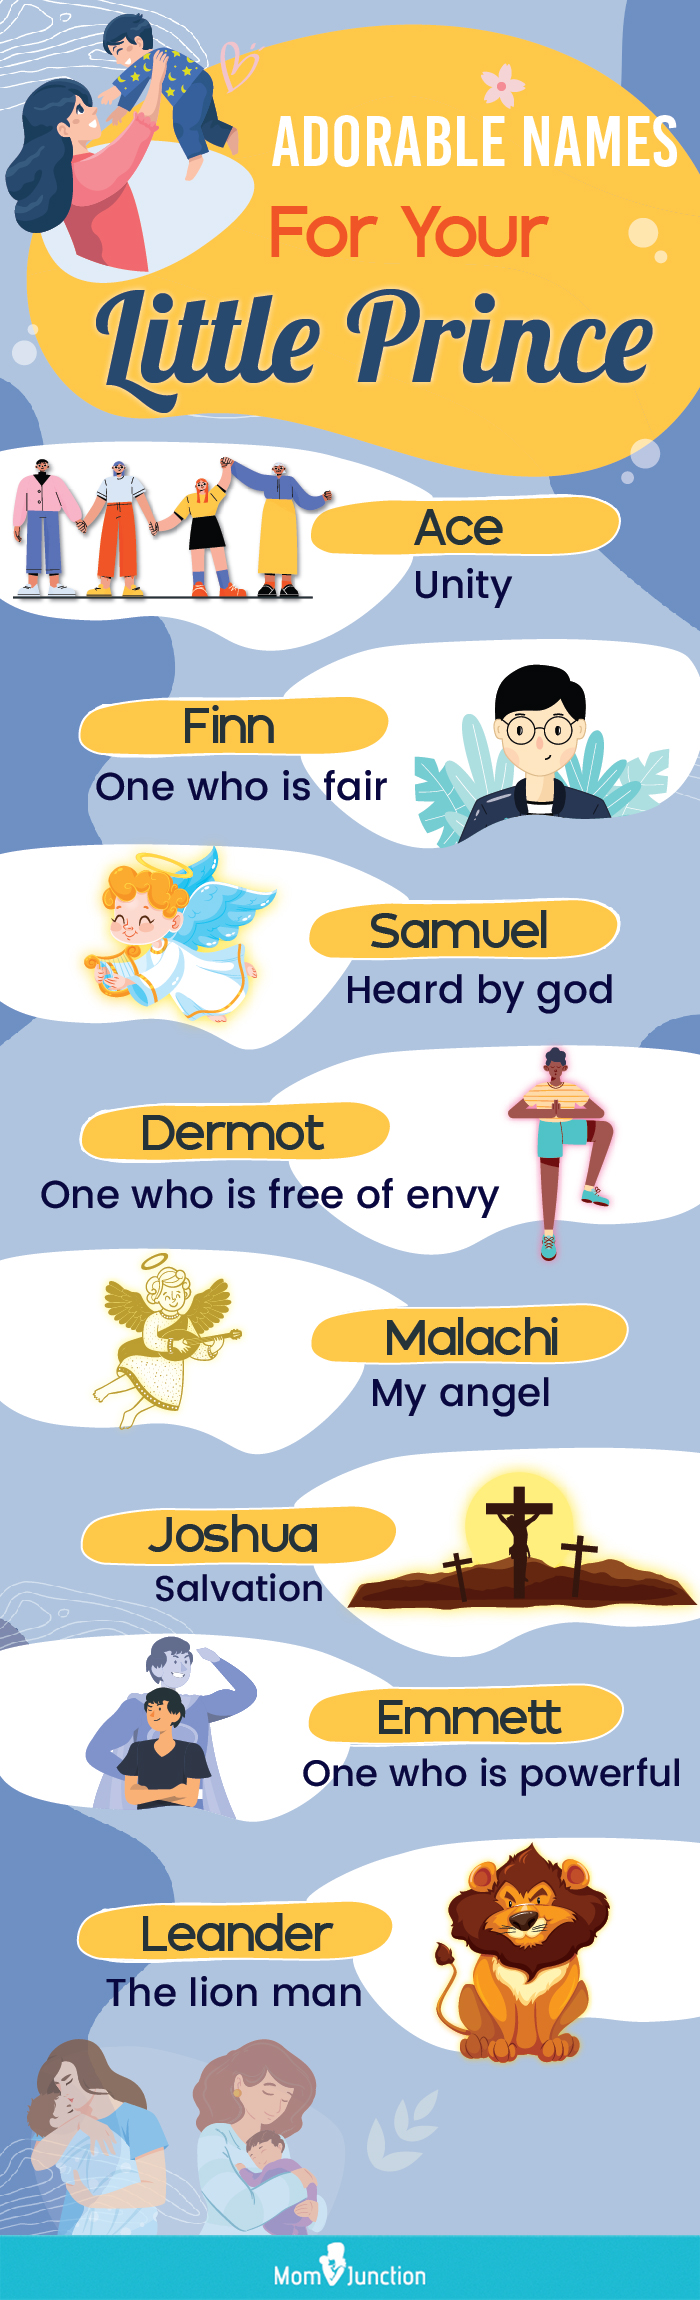 adorable names for your little prince (infographic)